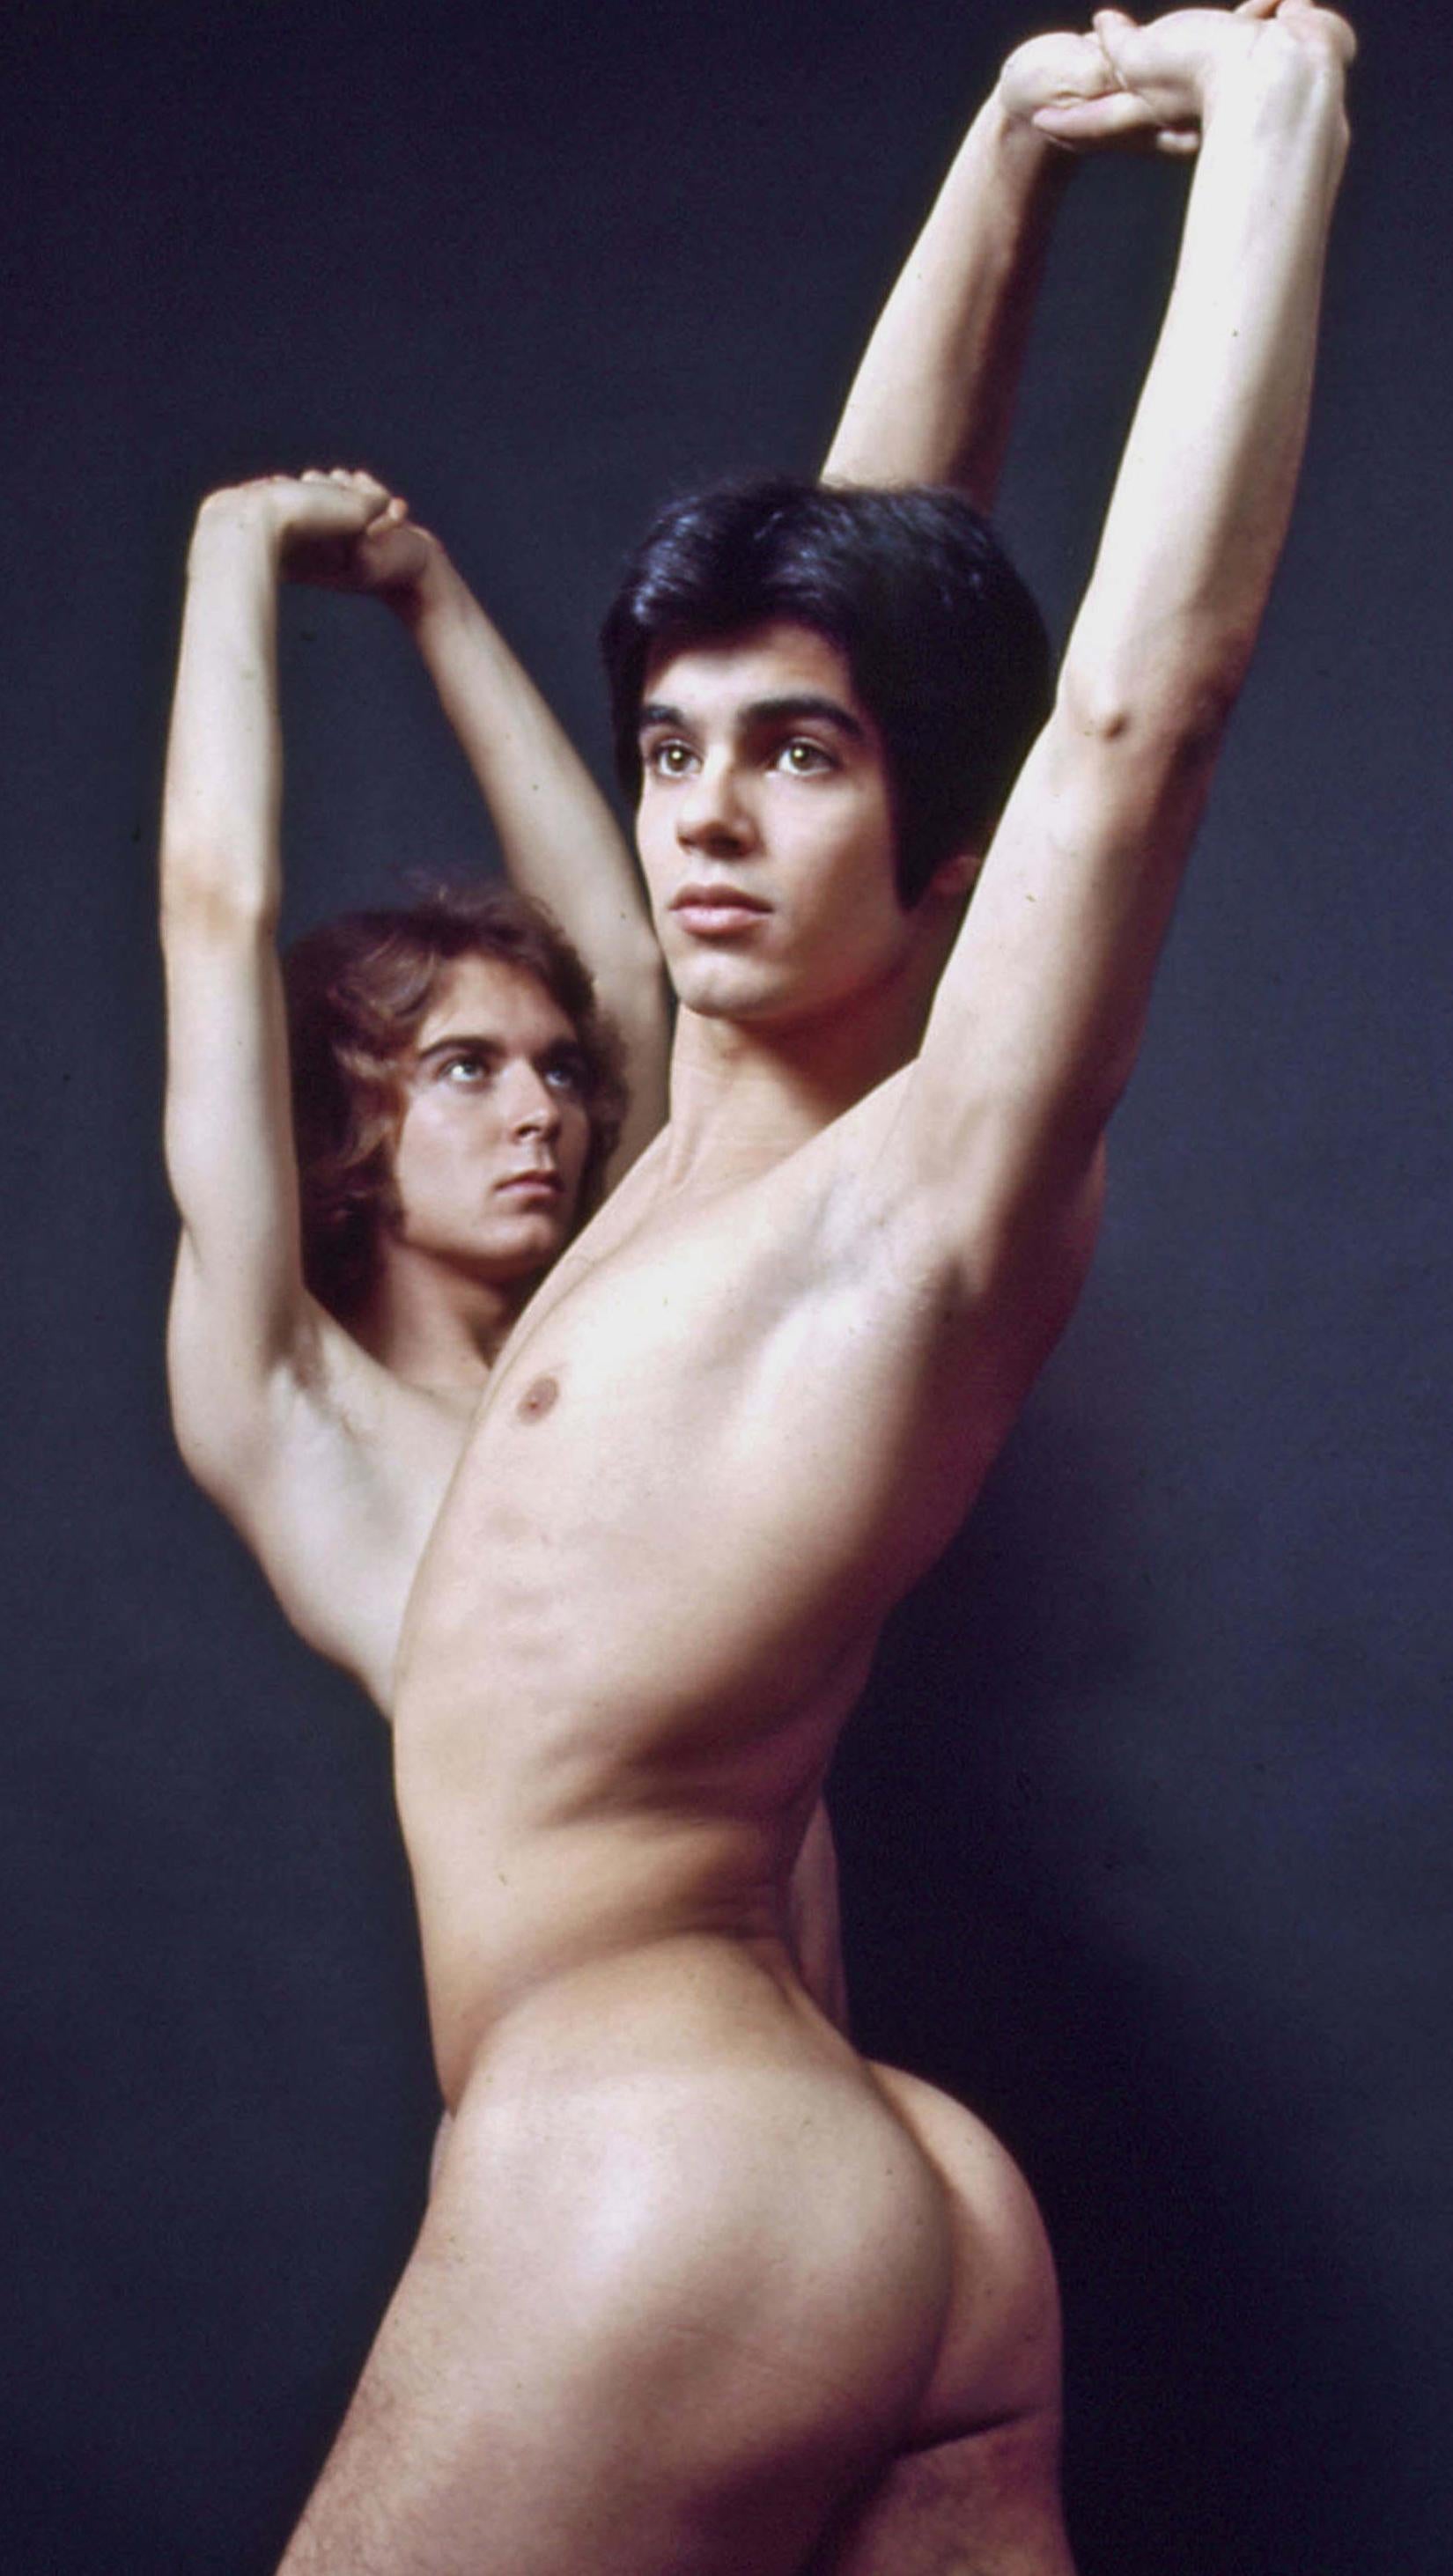 Dancers David Loring & Michael Bradshaw, nude study for 'After Dark' magazine - Photograph by Jack Mitchell